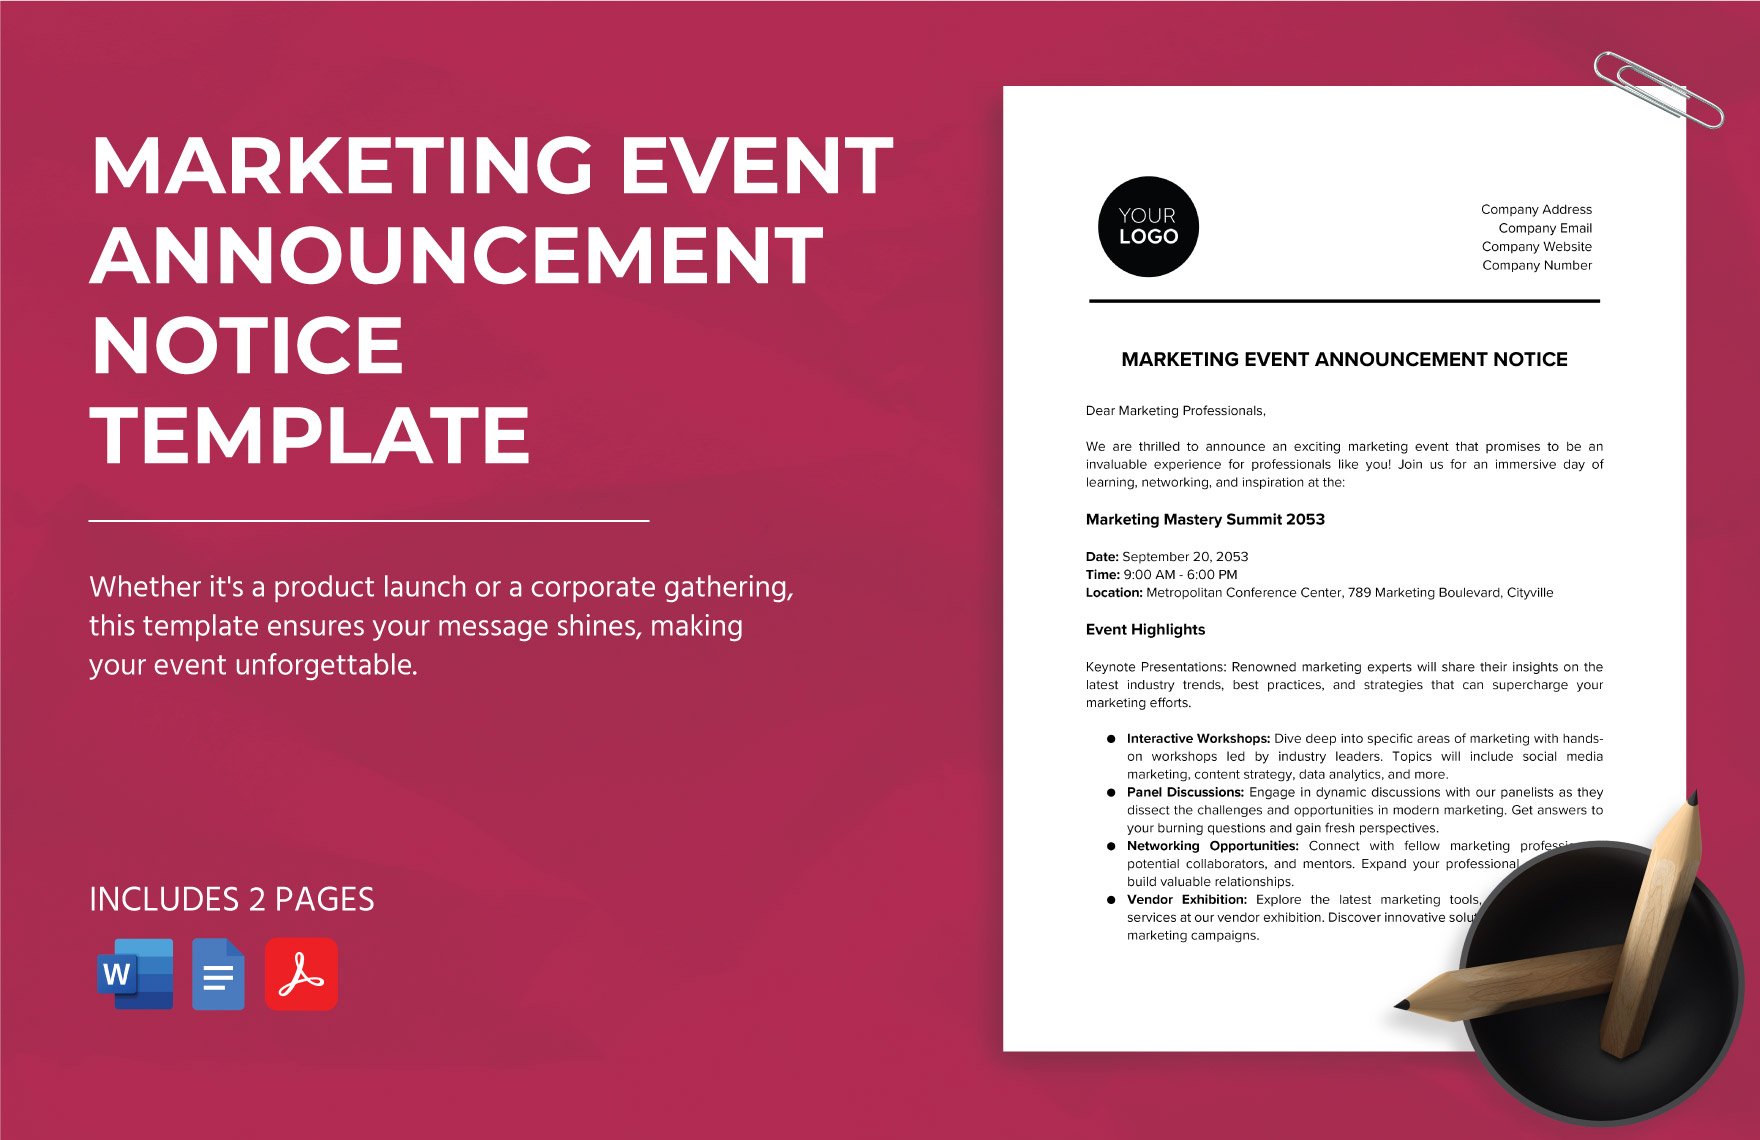 Marketing Event Announcement Notice Template in Word, Google Docs, PDF